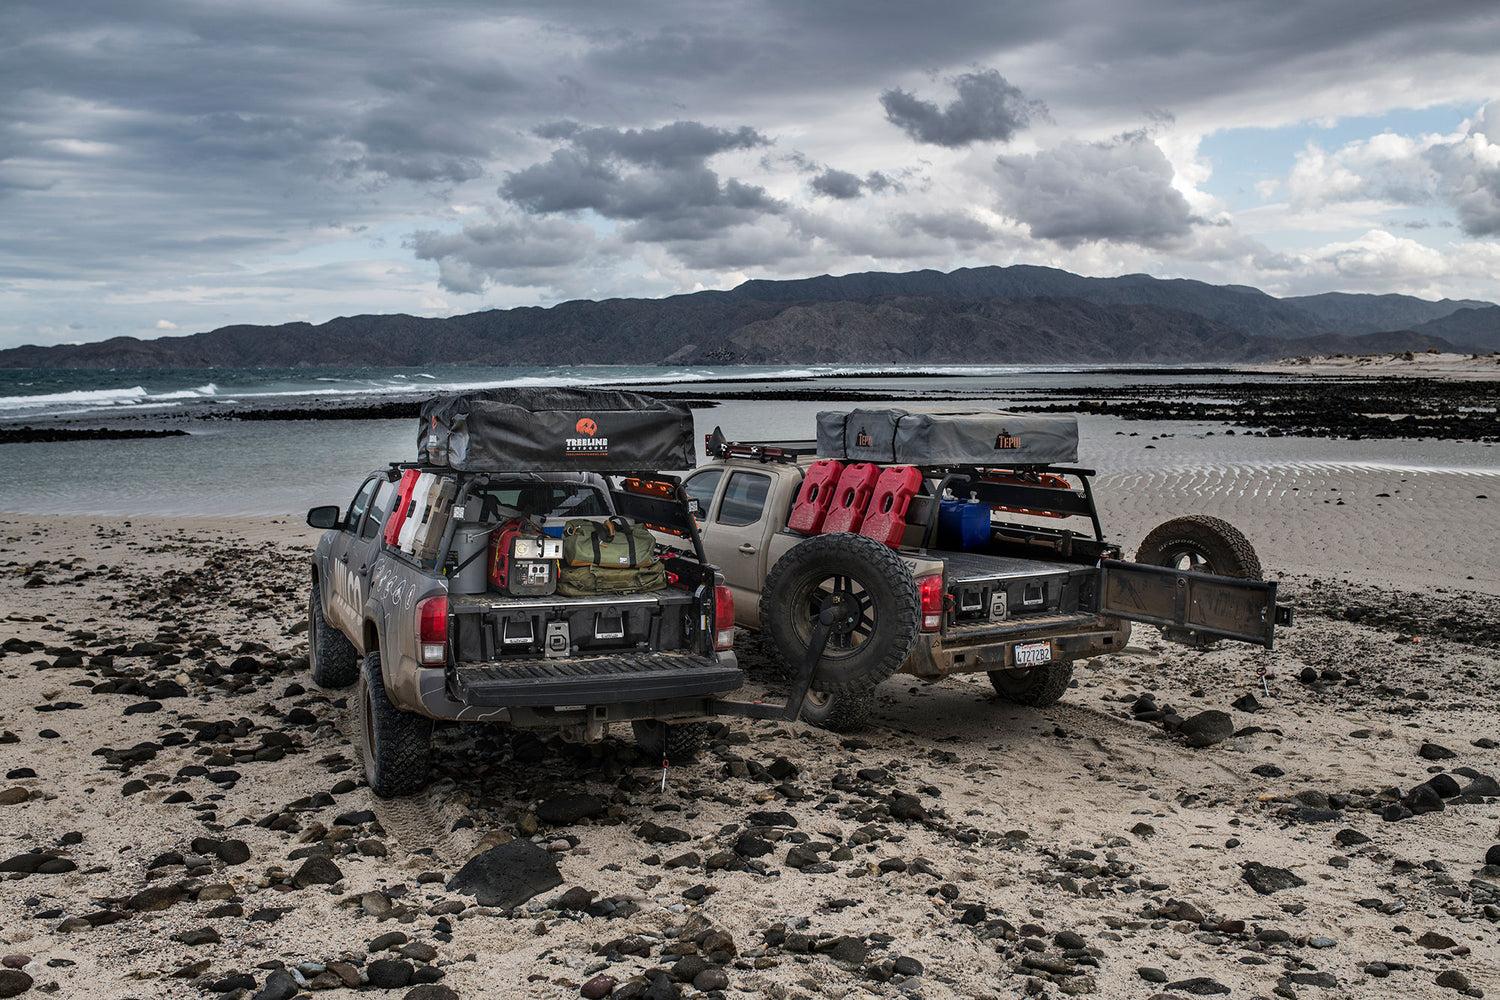 The DECKED List of the Top 5 Overland Vehicles